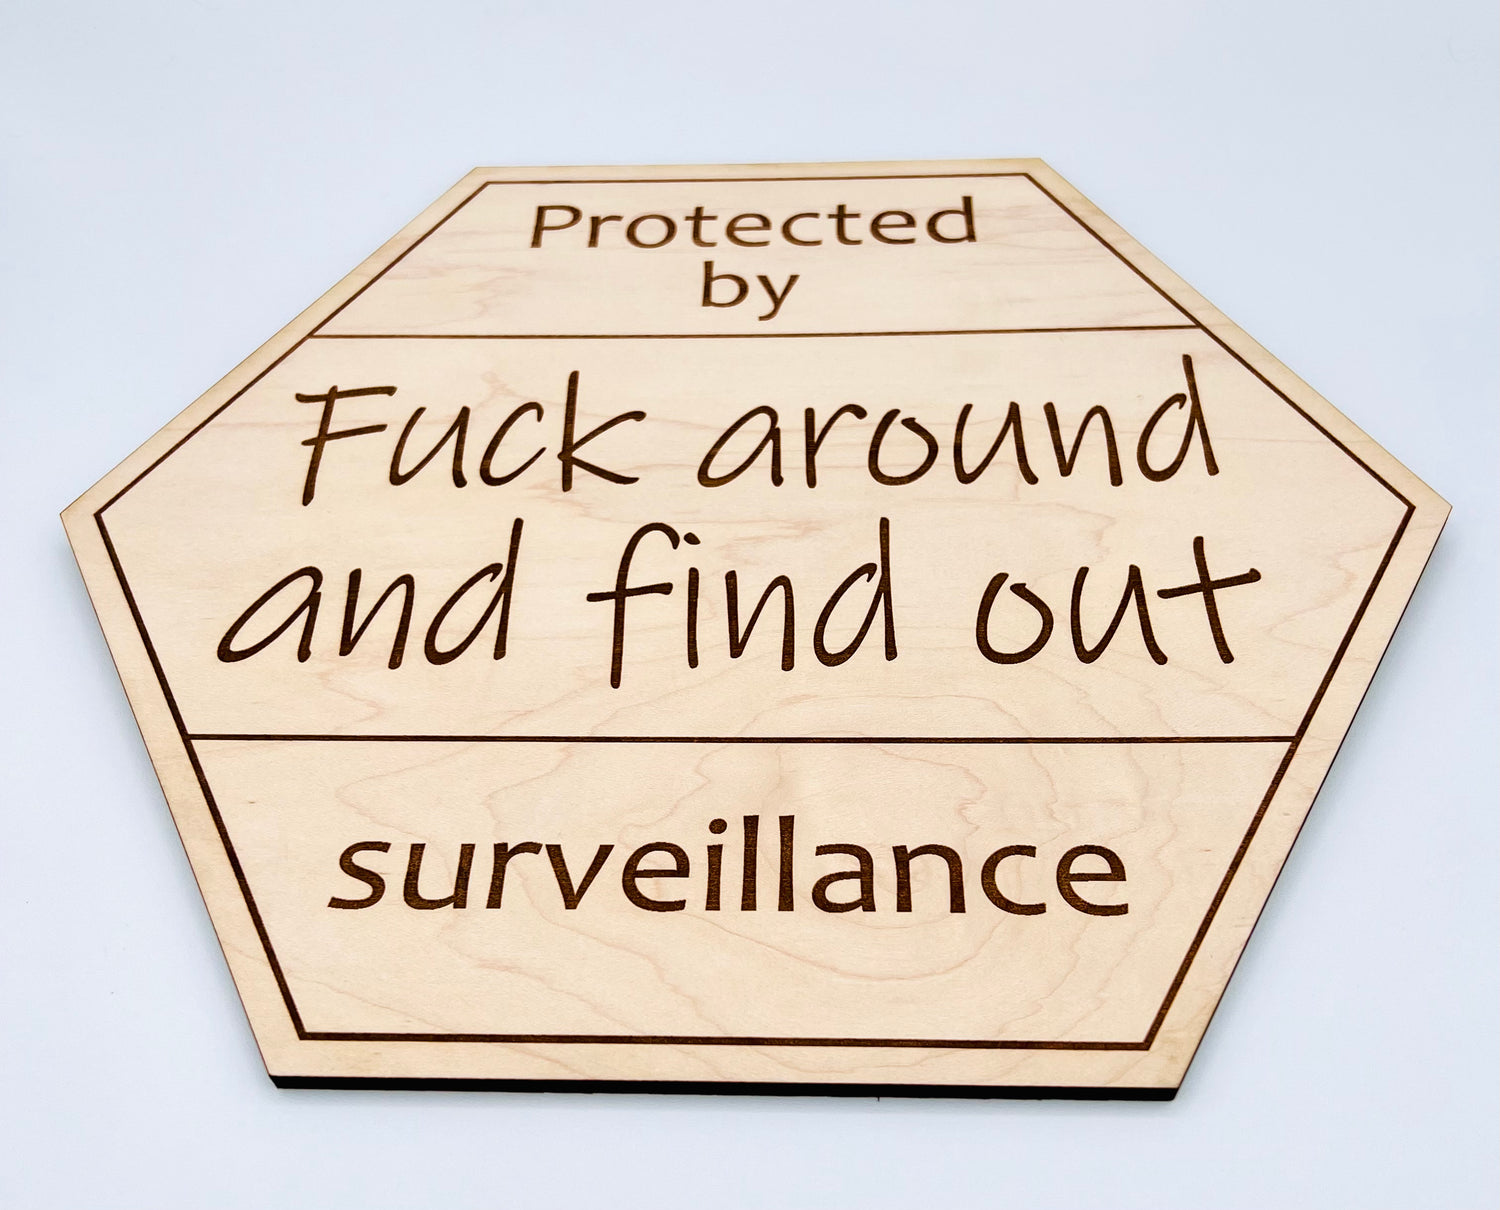 Protected by fuck around and find out surveillance sign